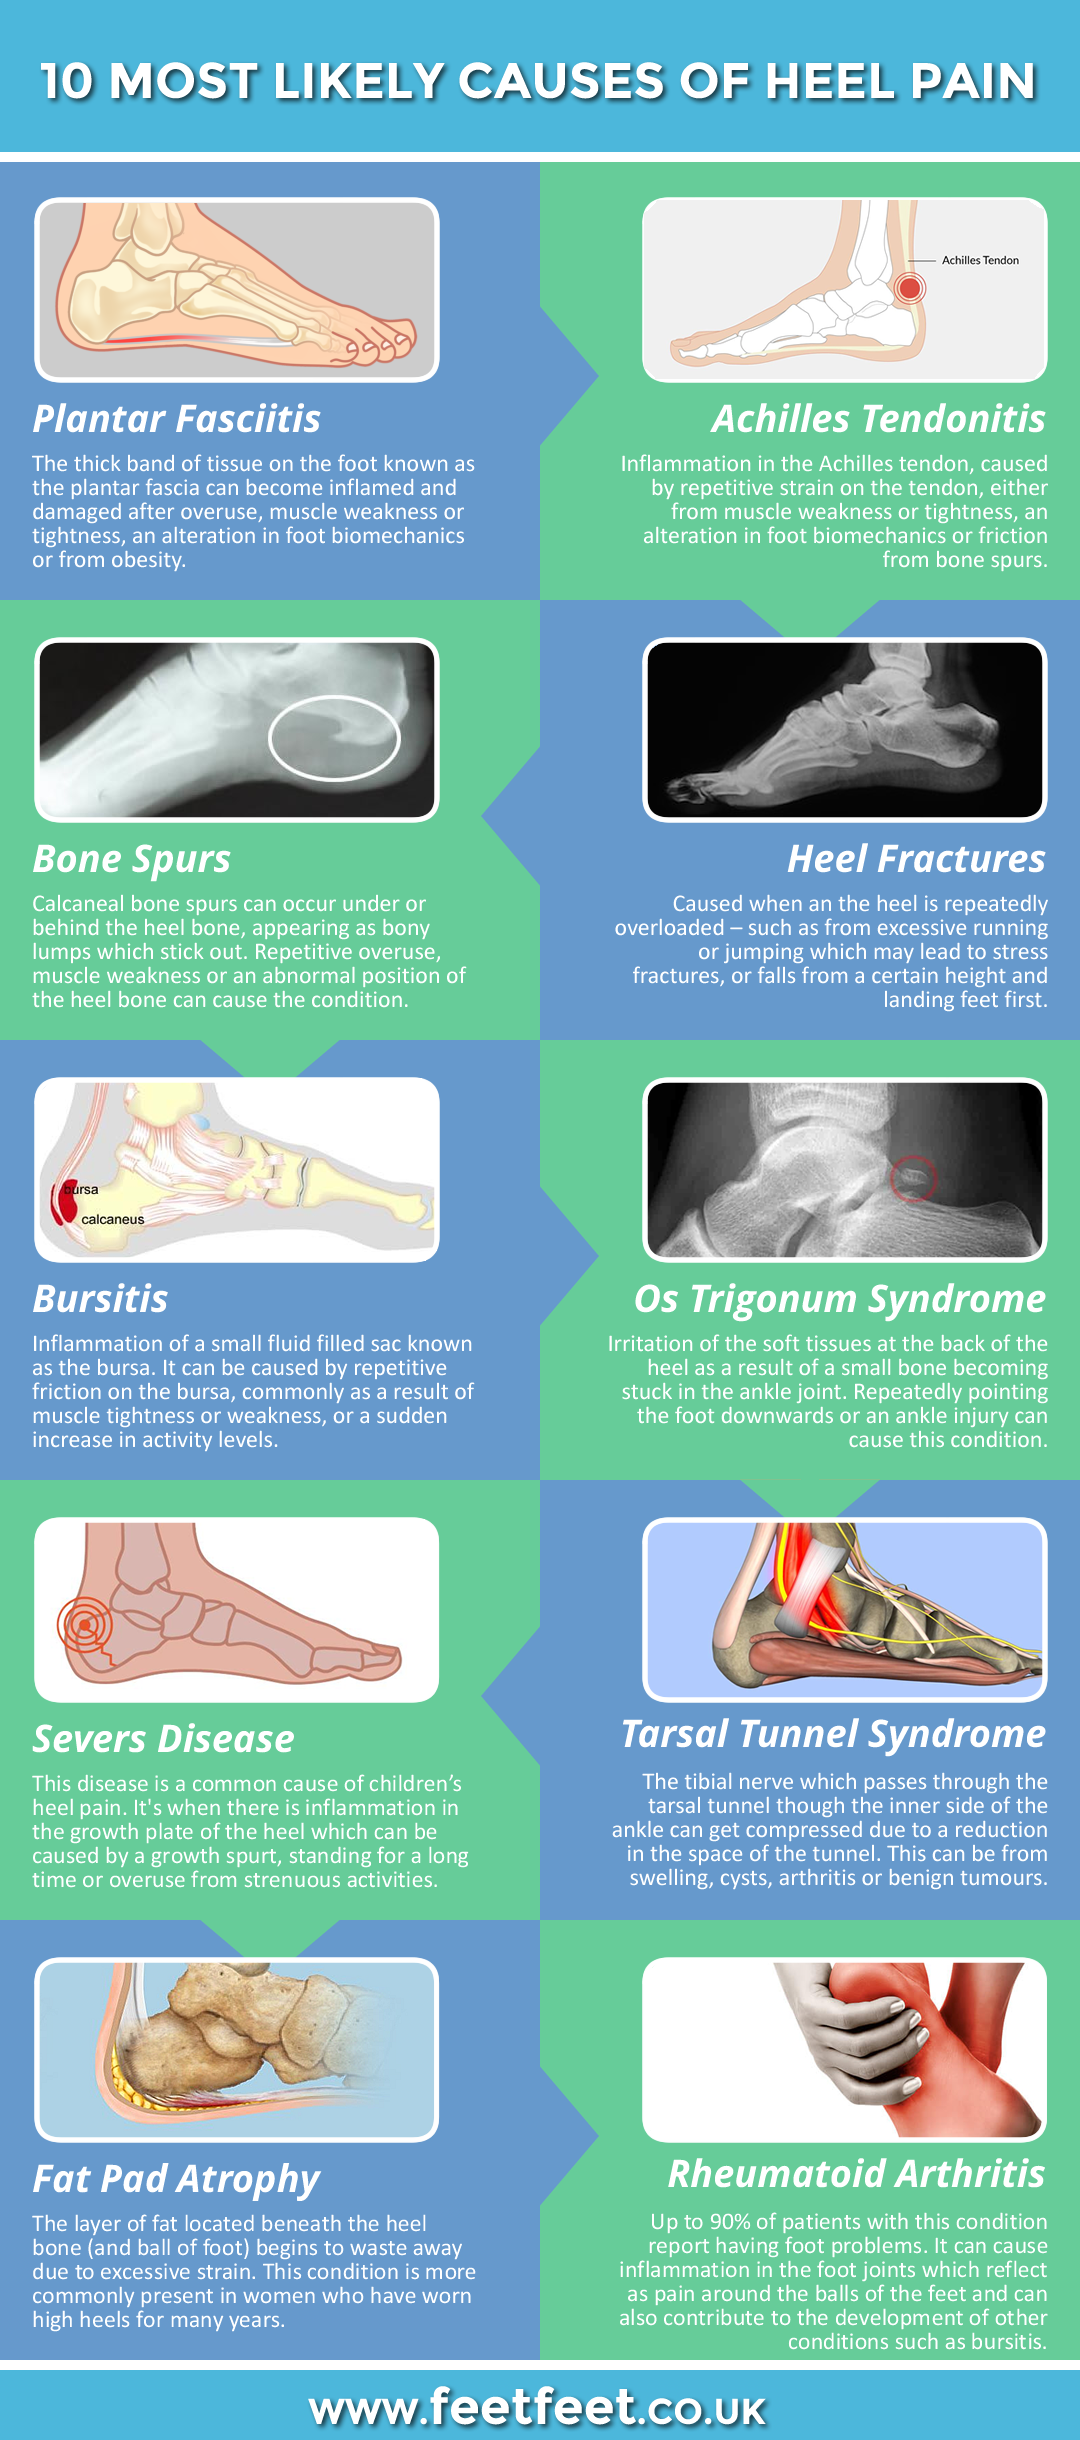 Pain on Top of Foot: Causes, Treatment, and More